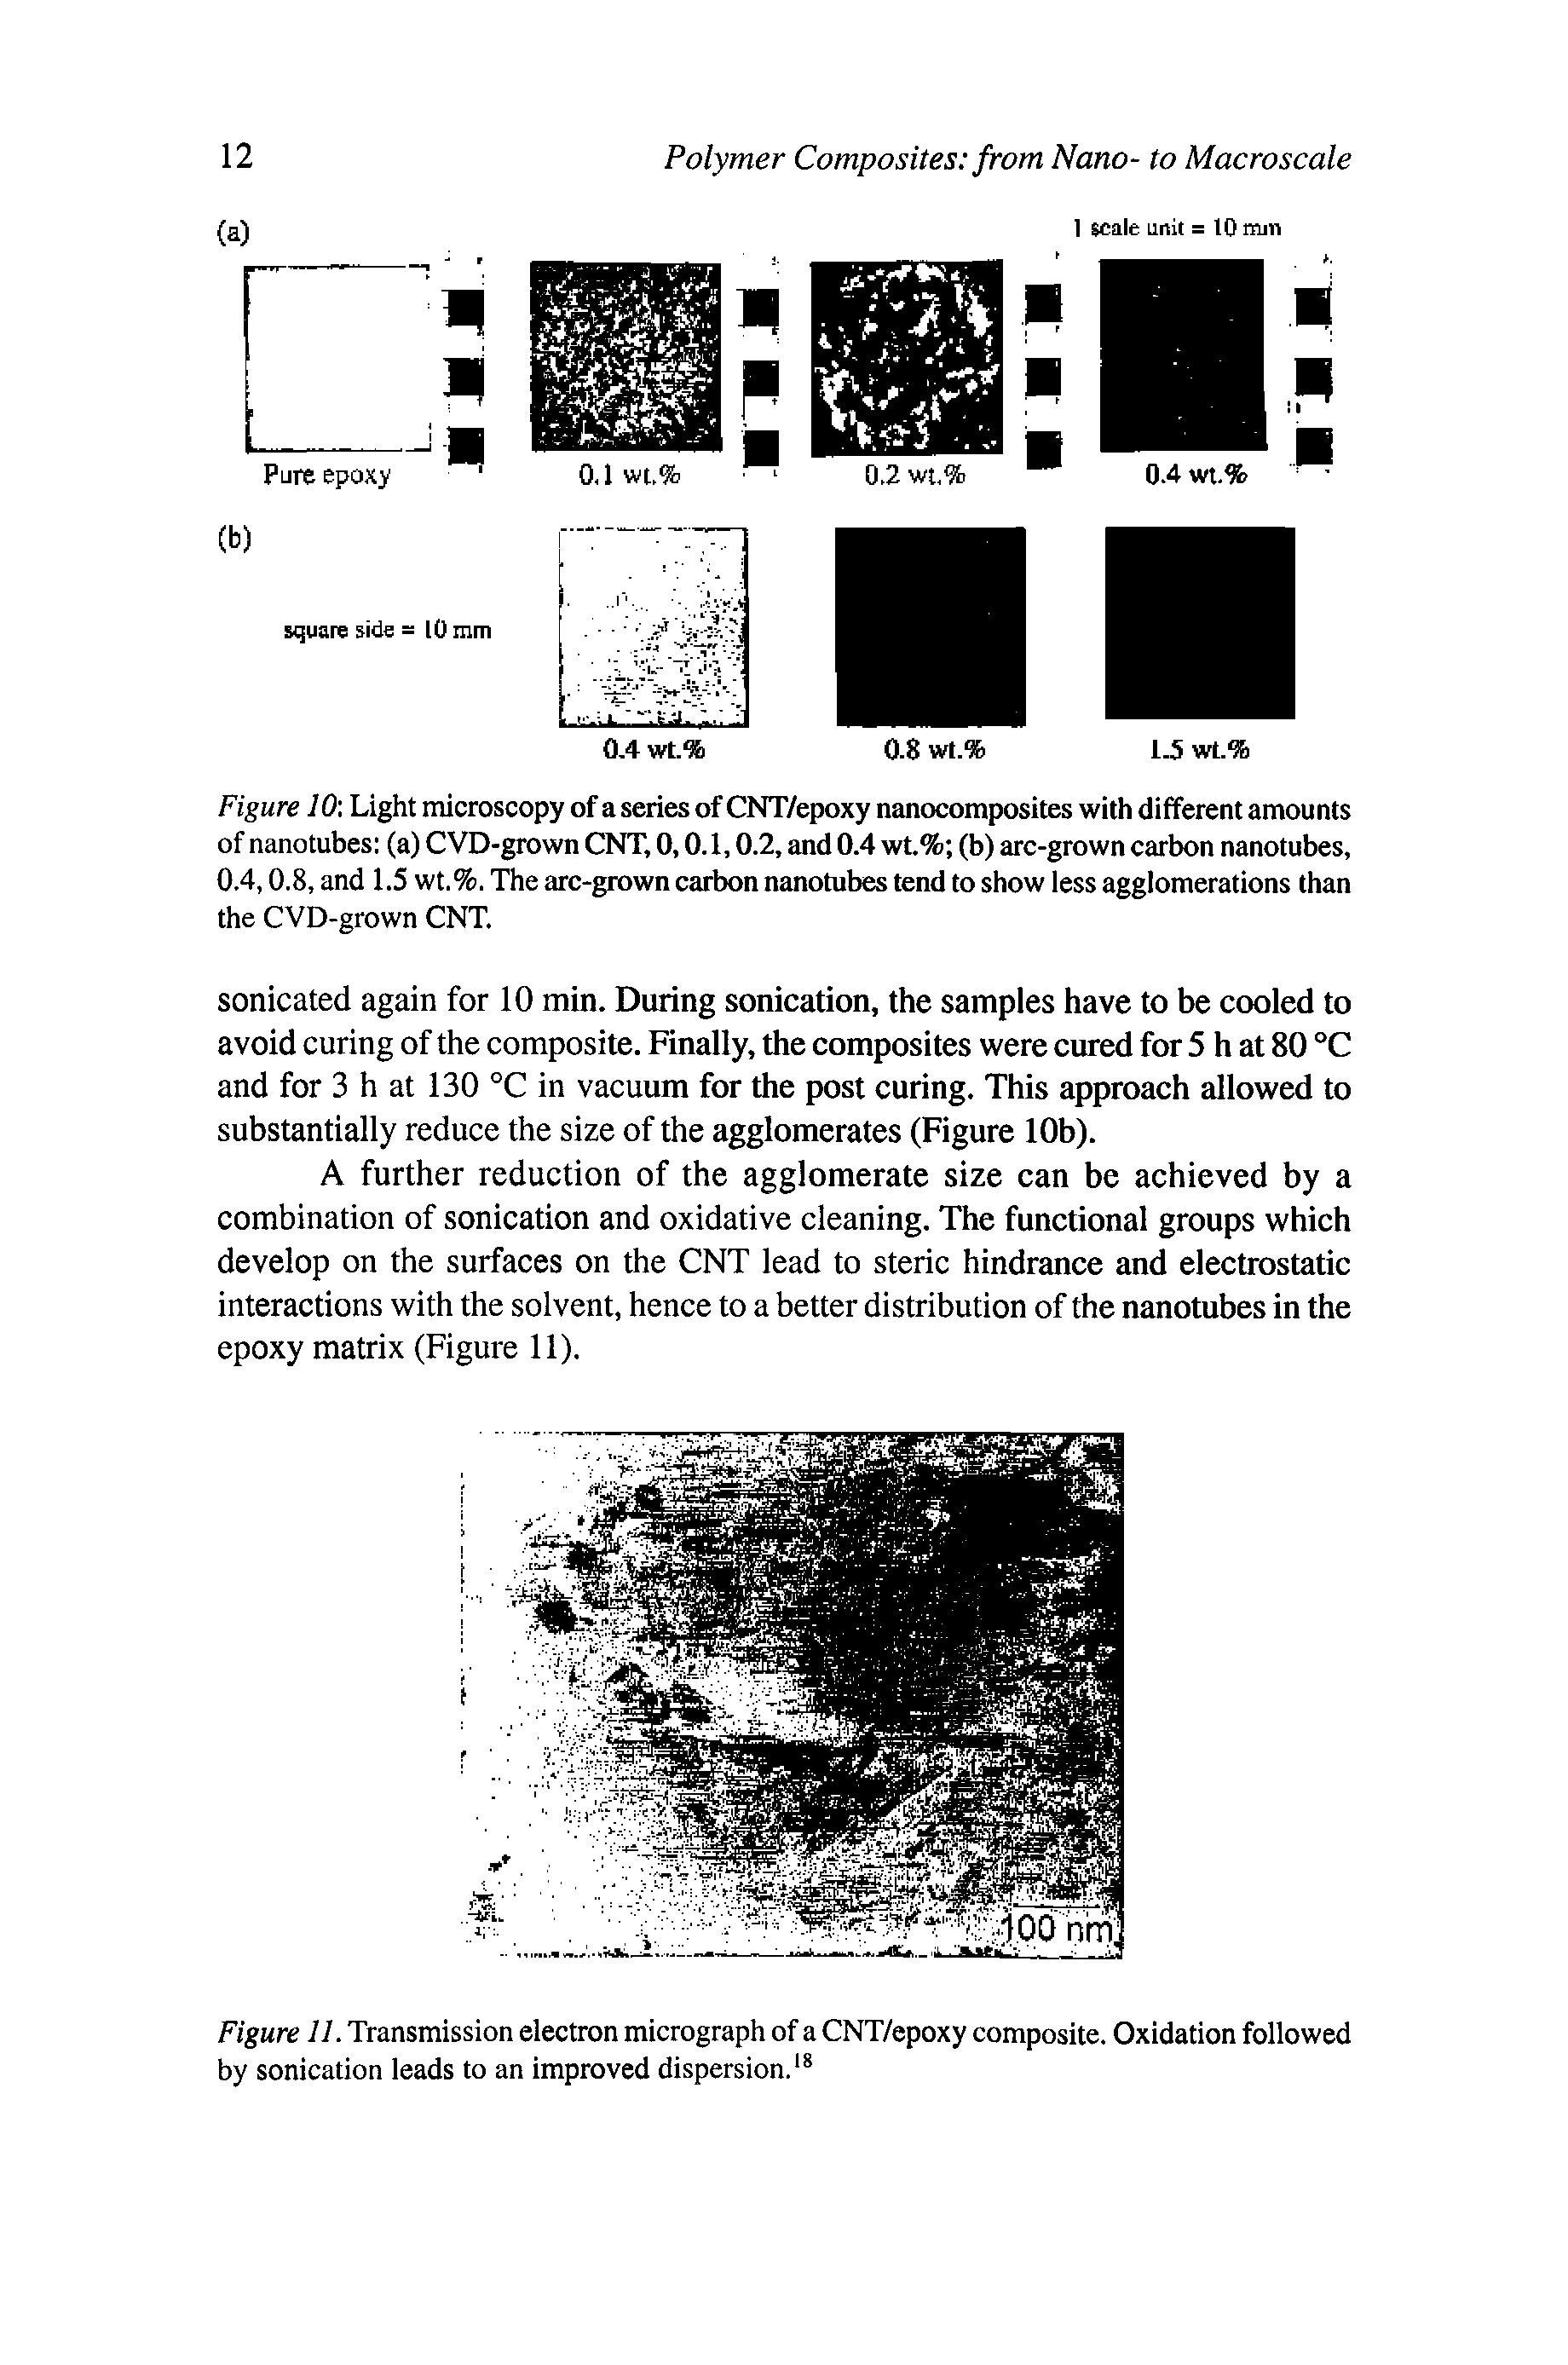 Figure 11. Transmission electron micrograph of a CNT/epoxy composite. Oxidation followed by sonication leads to an Improved dispersion. ...